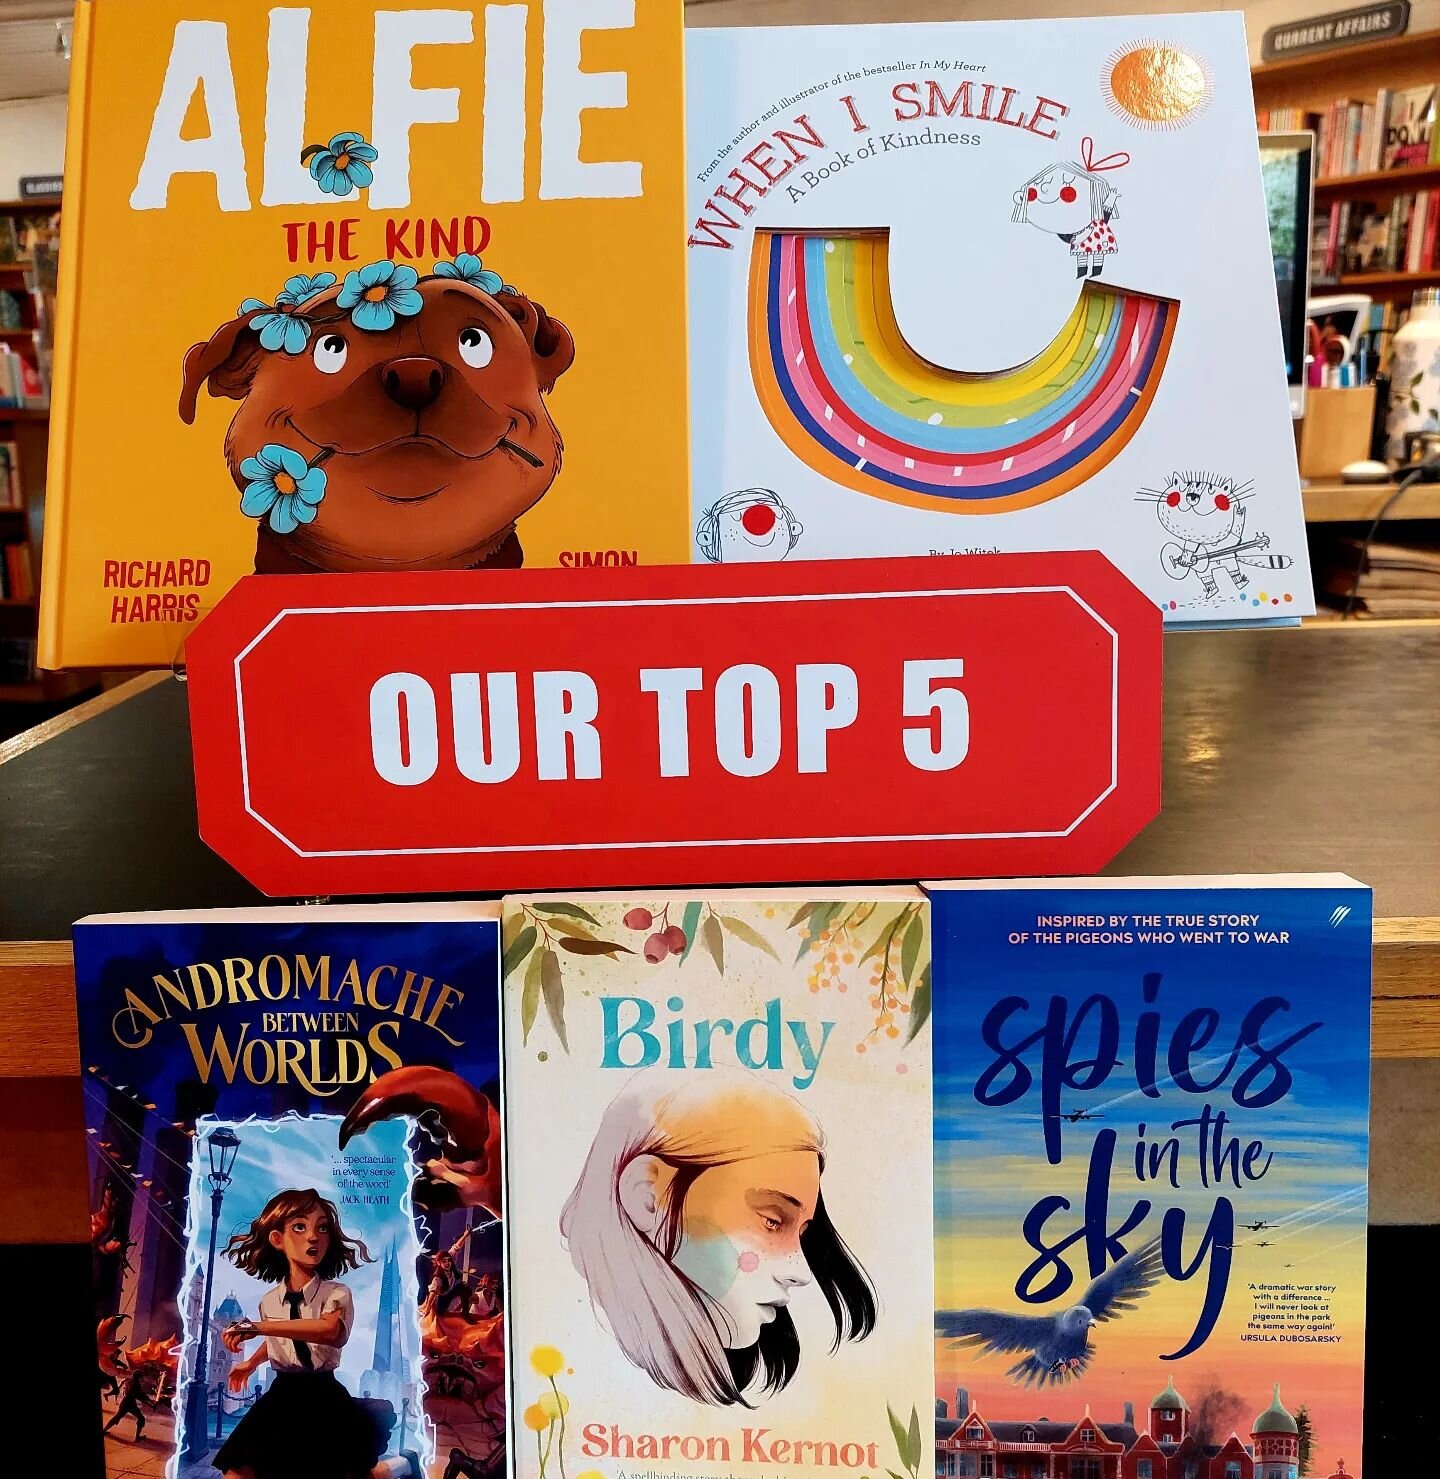 📚 Our Weekly Top Five 📚

Two bright, encouraging picture books for the young and young at heart alike start off our lovely list today 💛 Alfie and When I Smile both make us smile a lot 😄

Our March teen and middle fiction book club choices make an